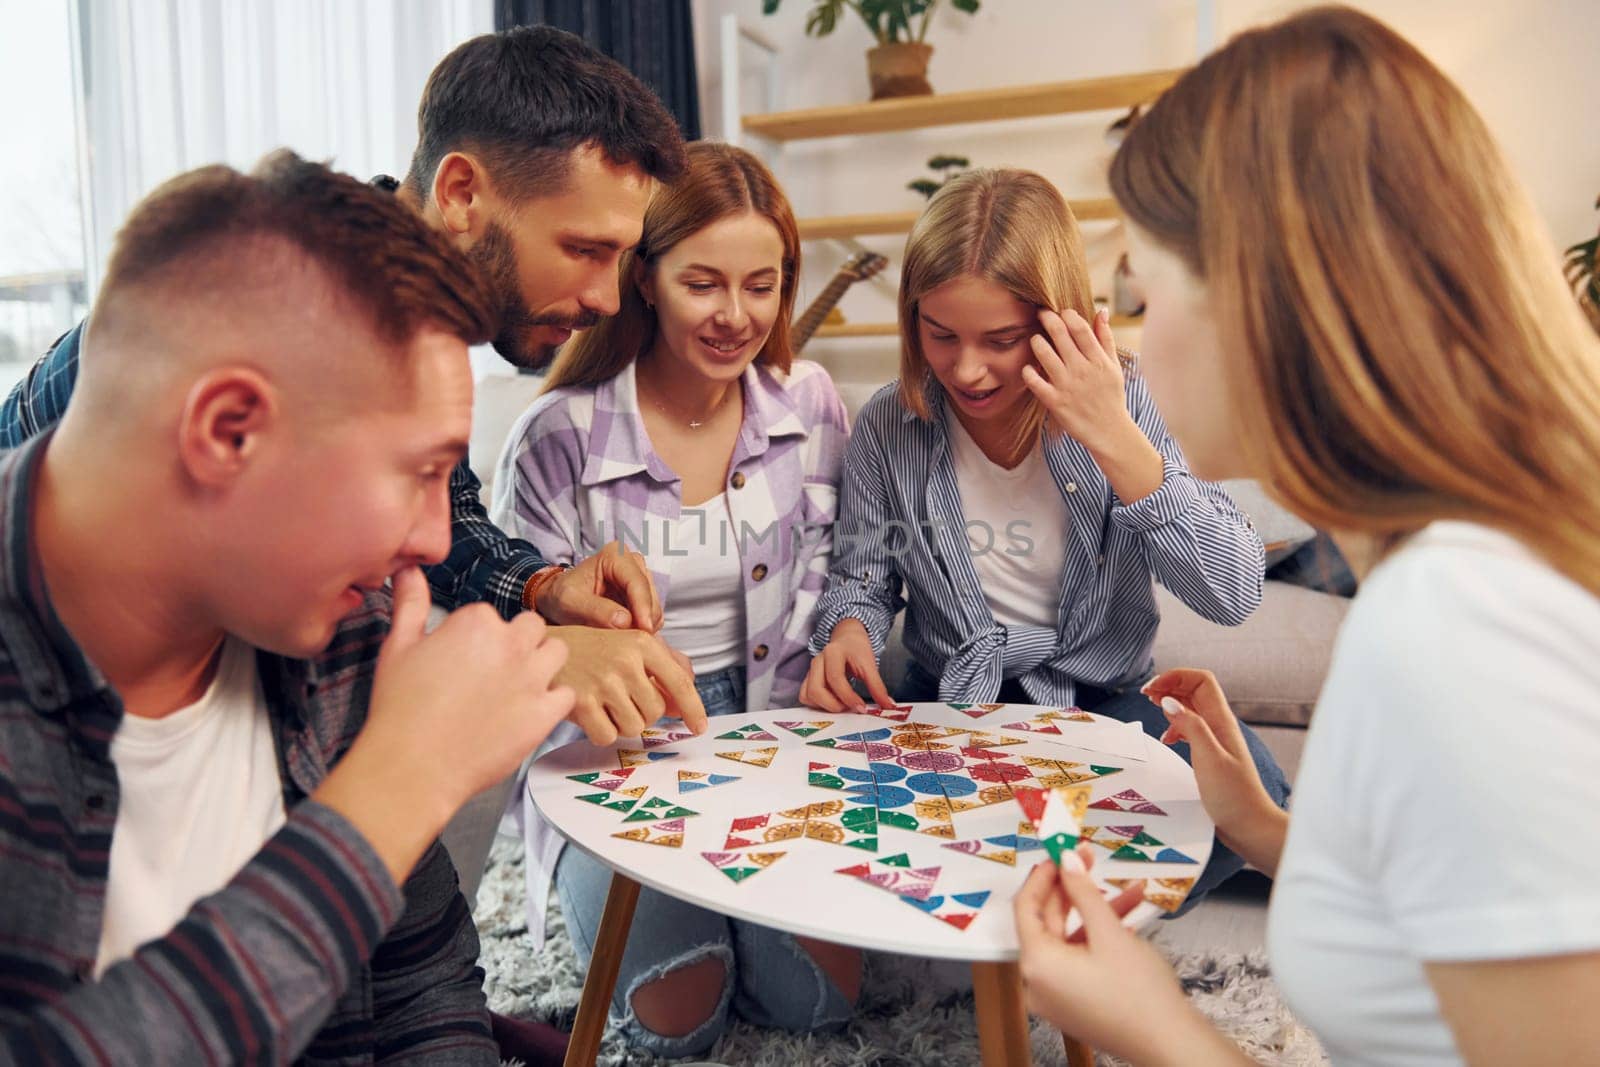 Puzzle game on the table. Group of friends have party indoors together.